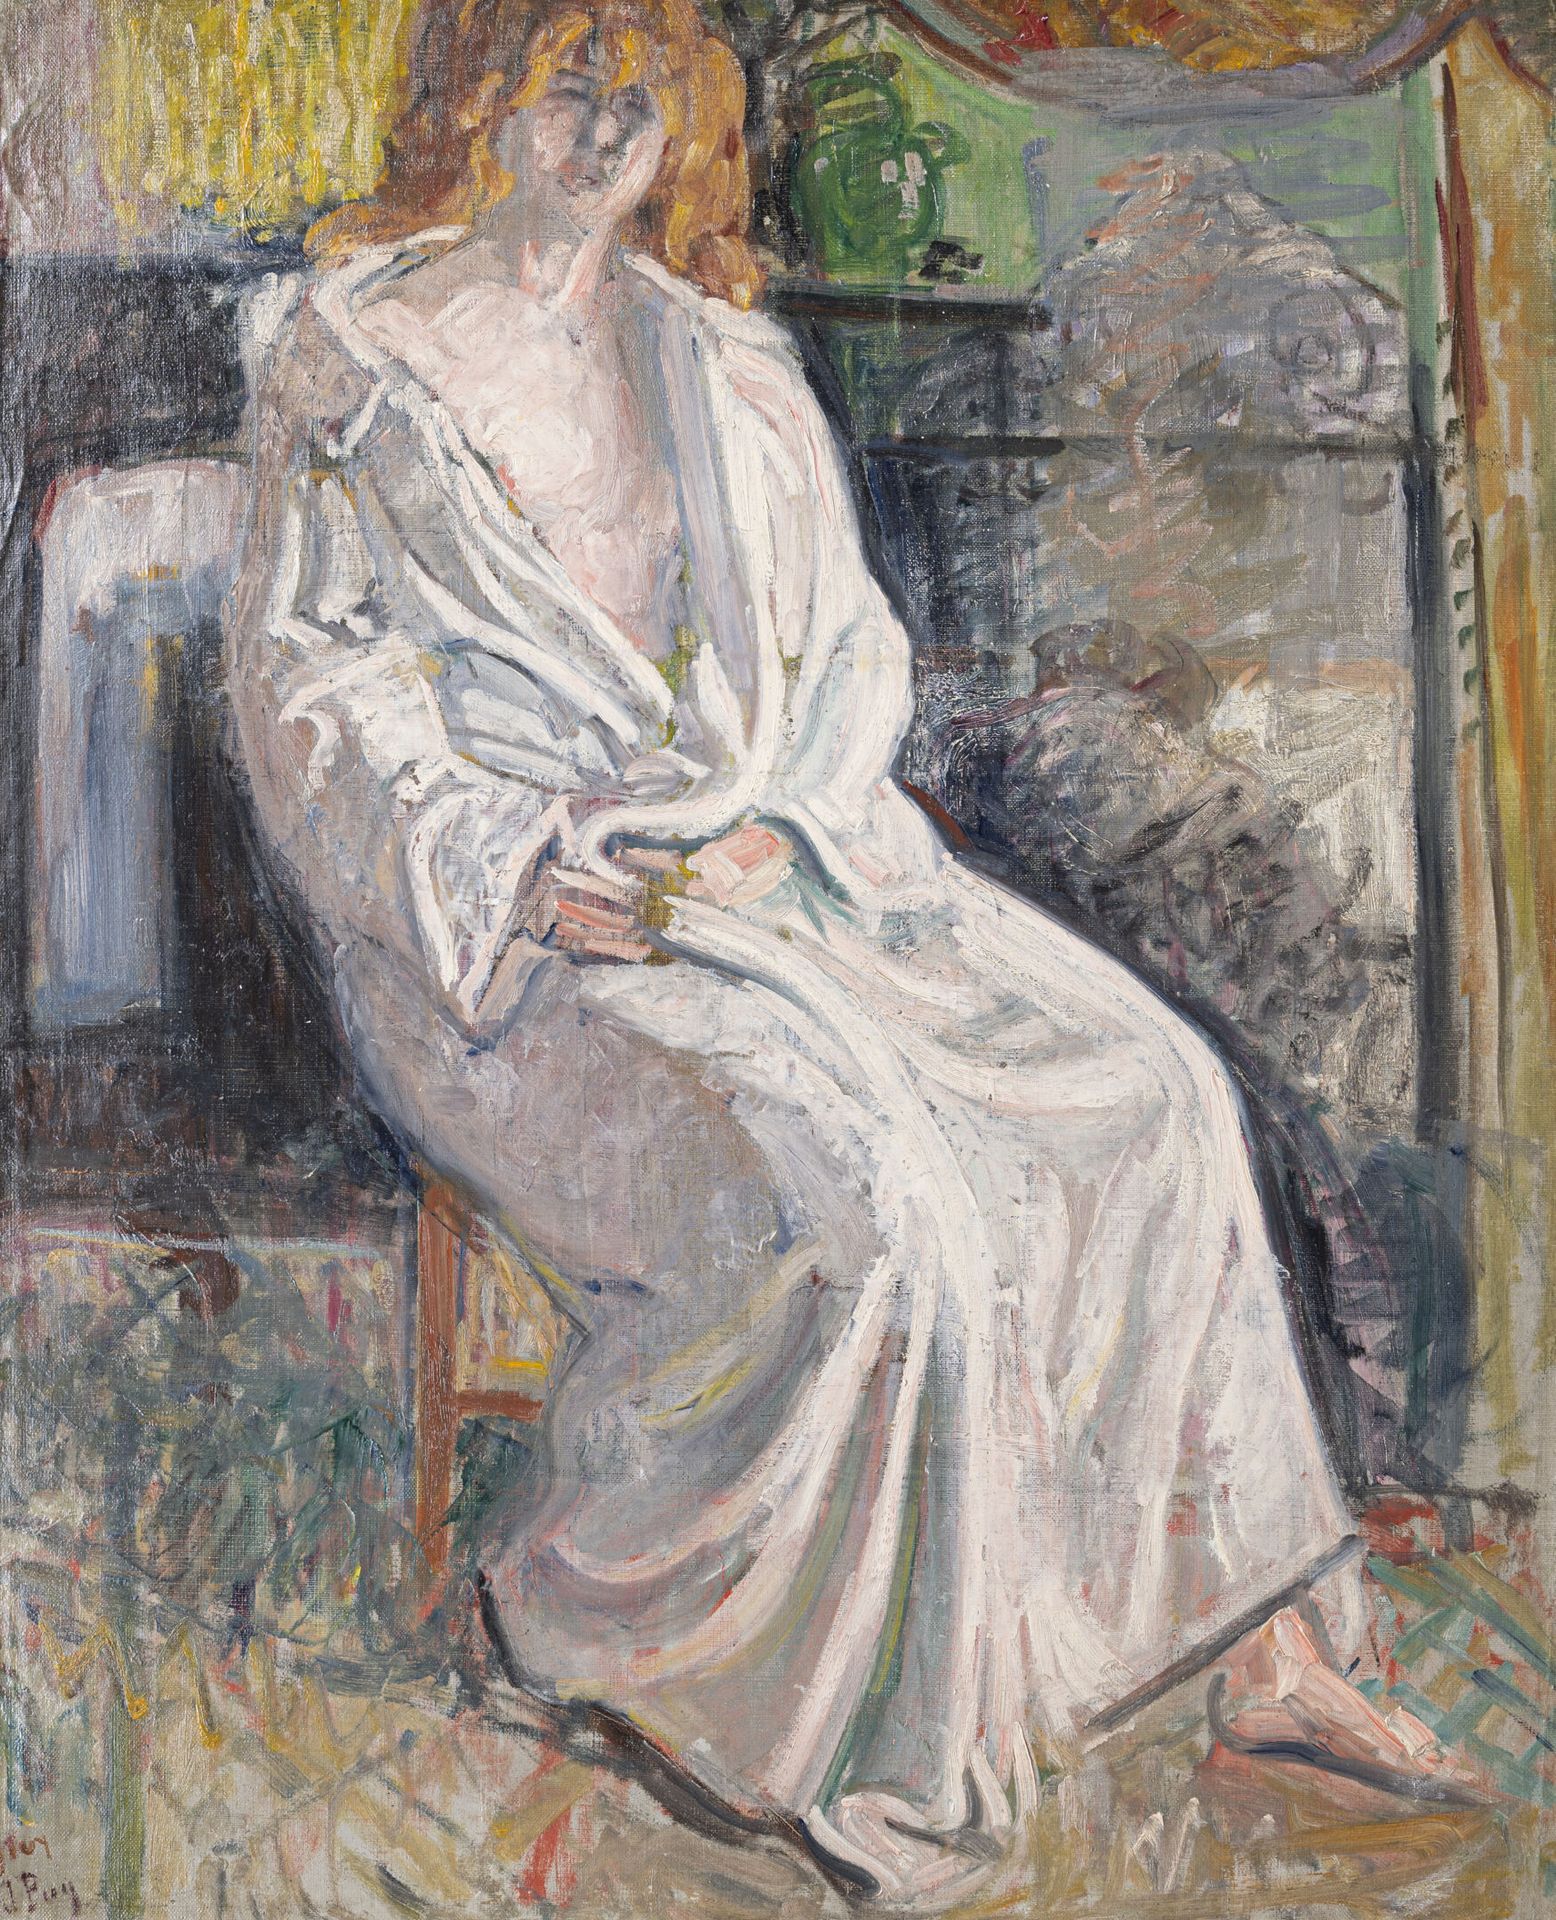 Null Jean PUY (1876-1960)

Femme rousse assise, circa 1903

Huile sur toile, sig&hellip;